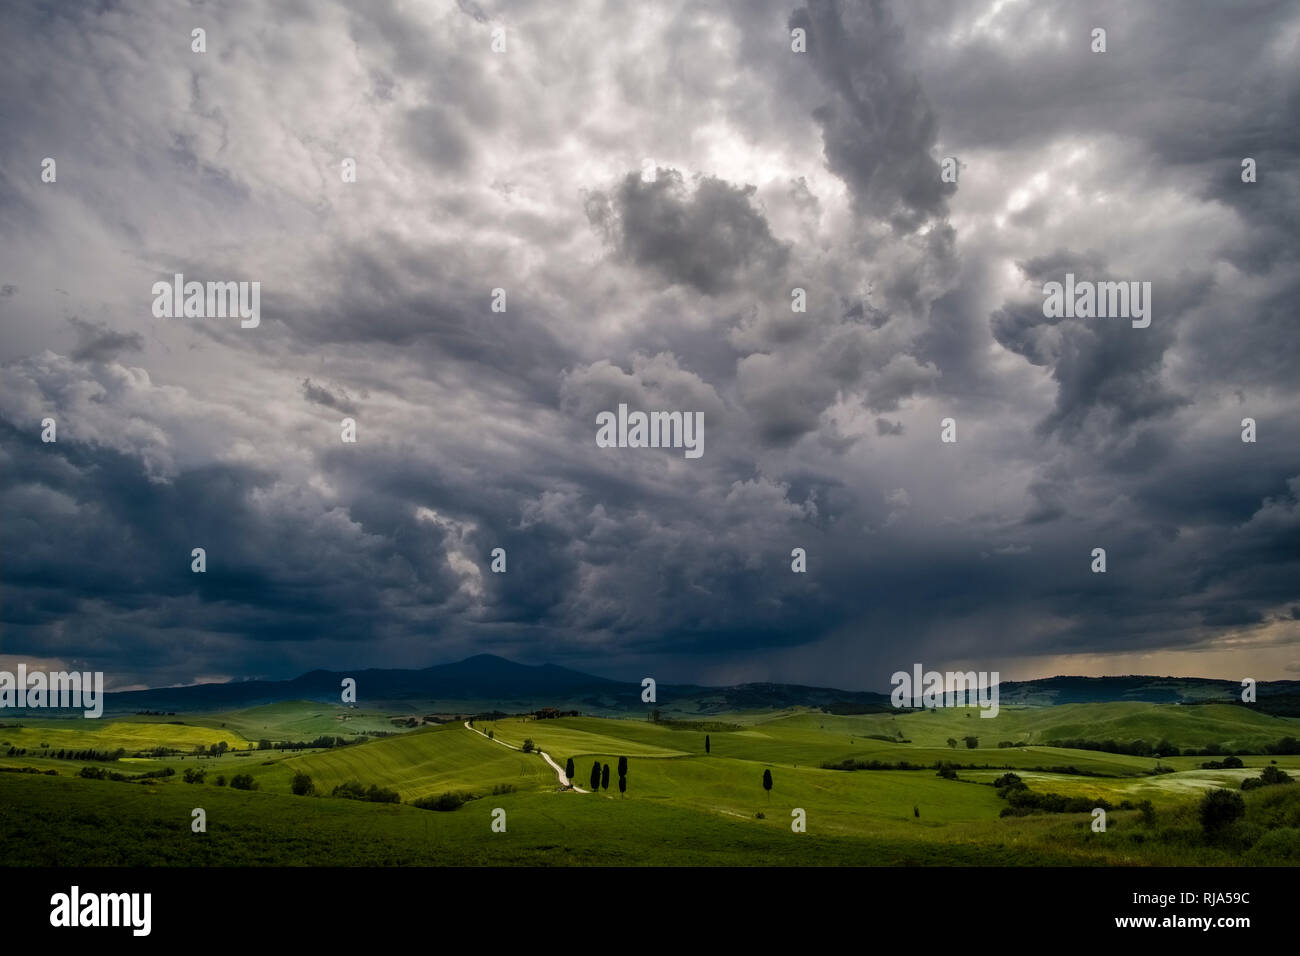 Panoramic aerial view on a typical hilly Tuscan countryside in Val d’Orcia with fields, trees, cypresses and a farmhouse, dark thunderstorm clouds app Stock Photo